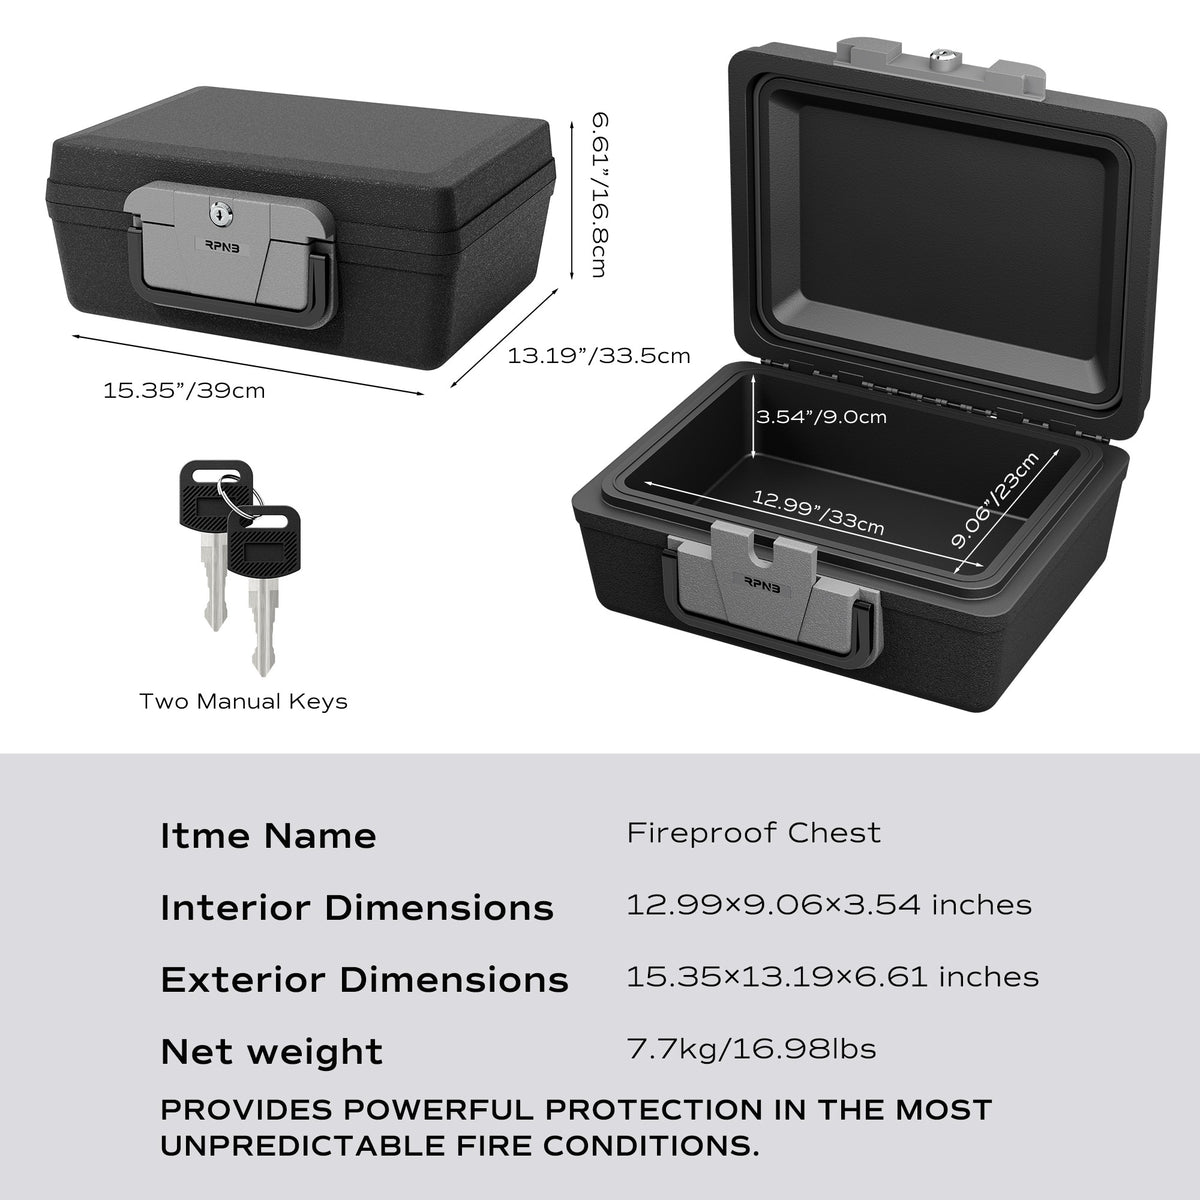 RPNB RPFST01 Fireproof Safe Box with Carrying Handle Dimensions